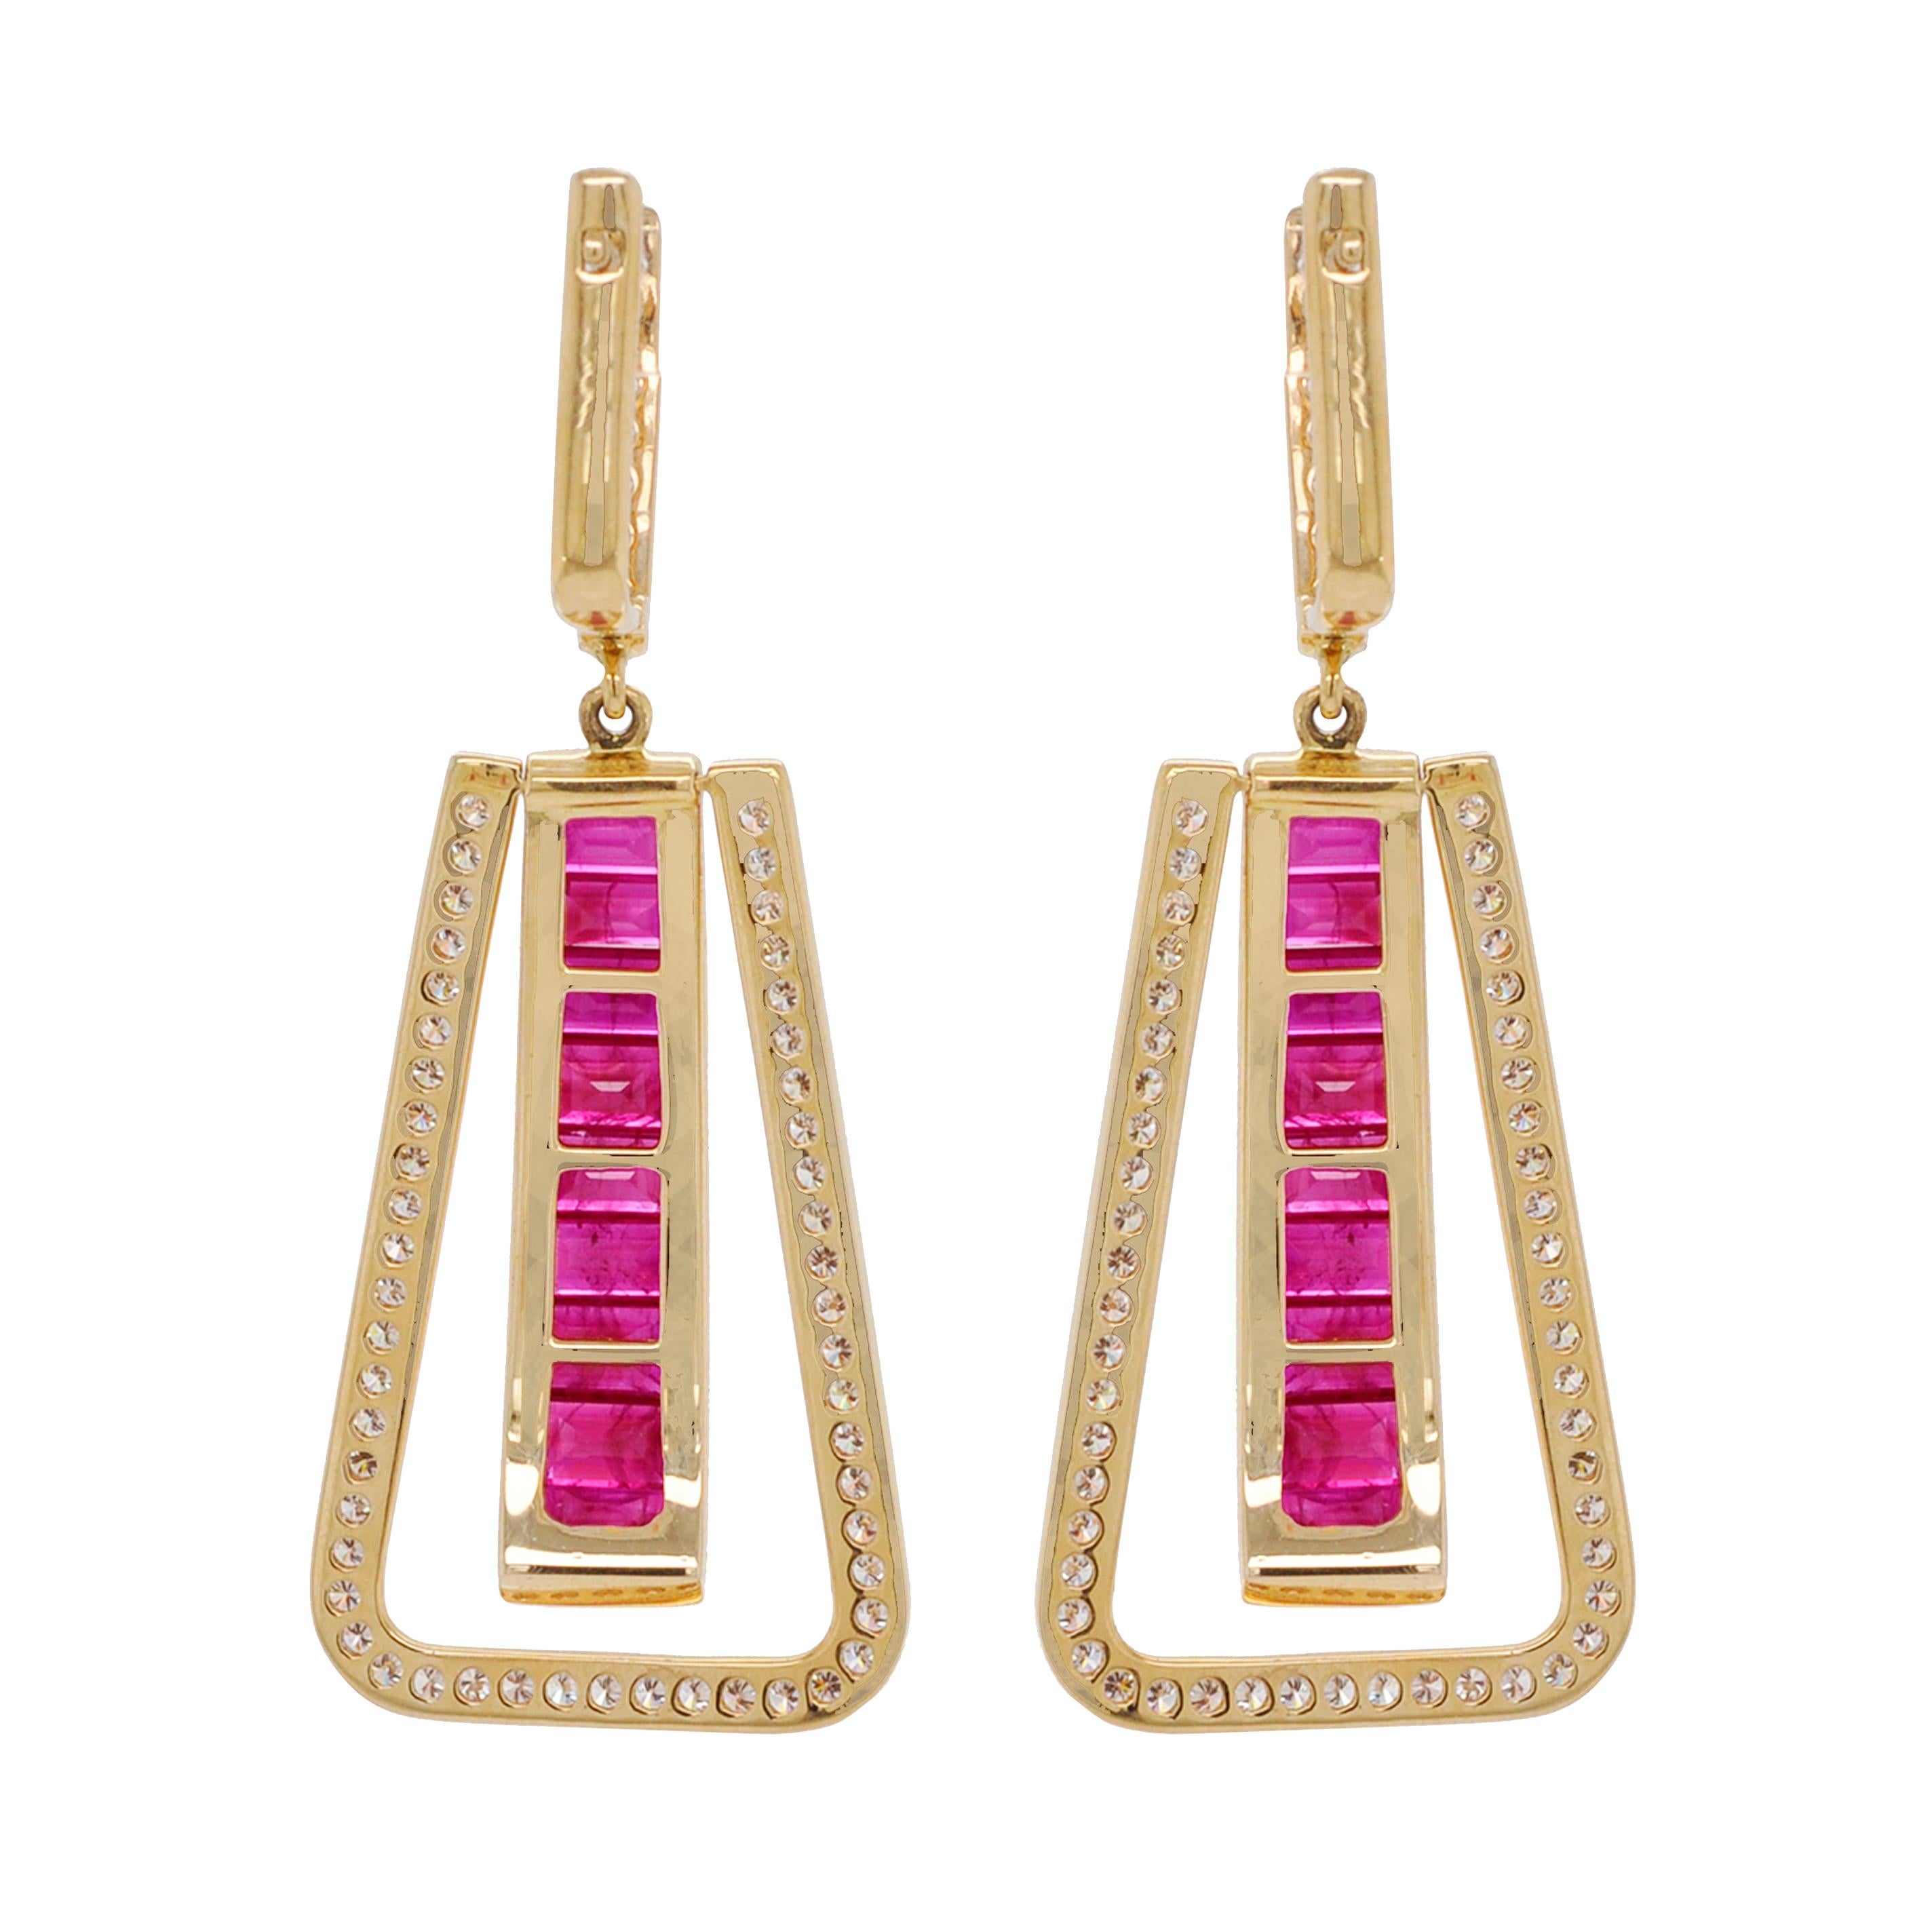 Art Deco Style 18 Karat Gold Channel Set Ruby Baguette Diamond Linear Earrings In New Condition For Sale In Jaipur, Rajasthan